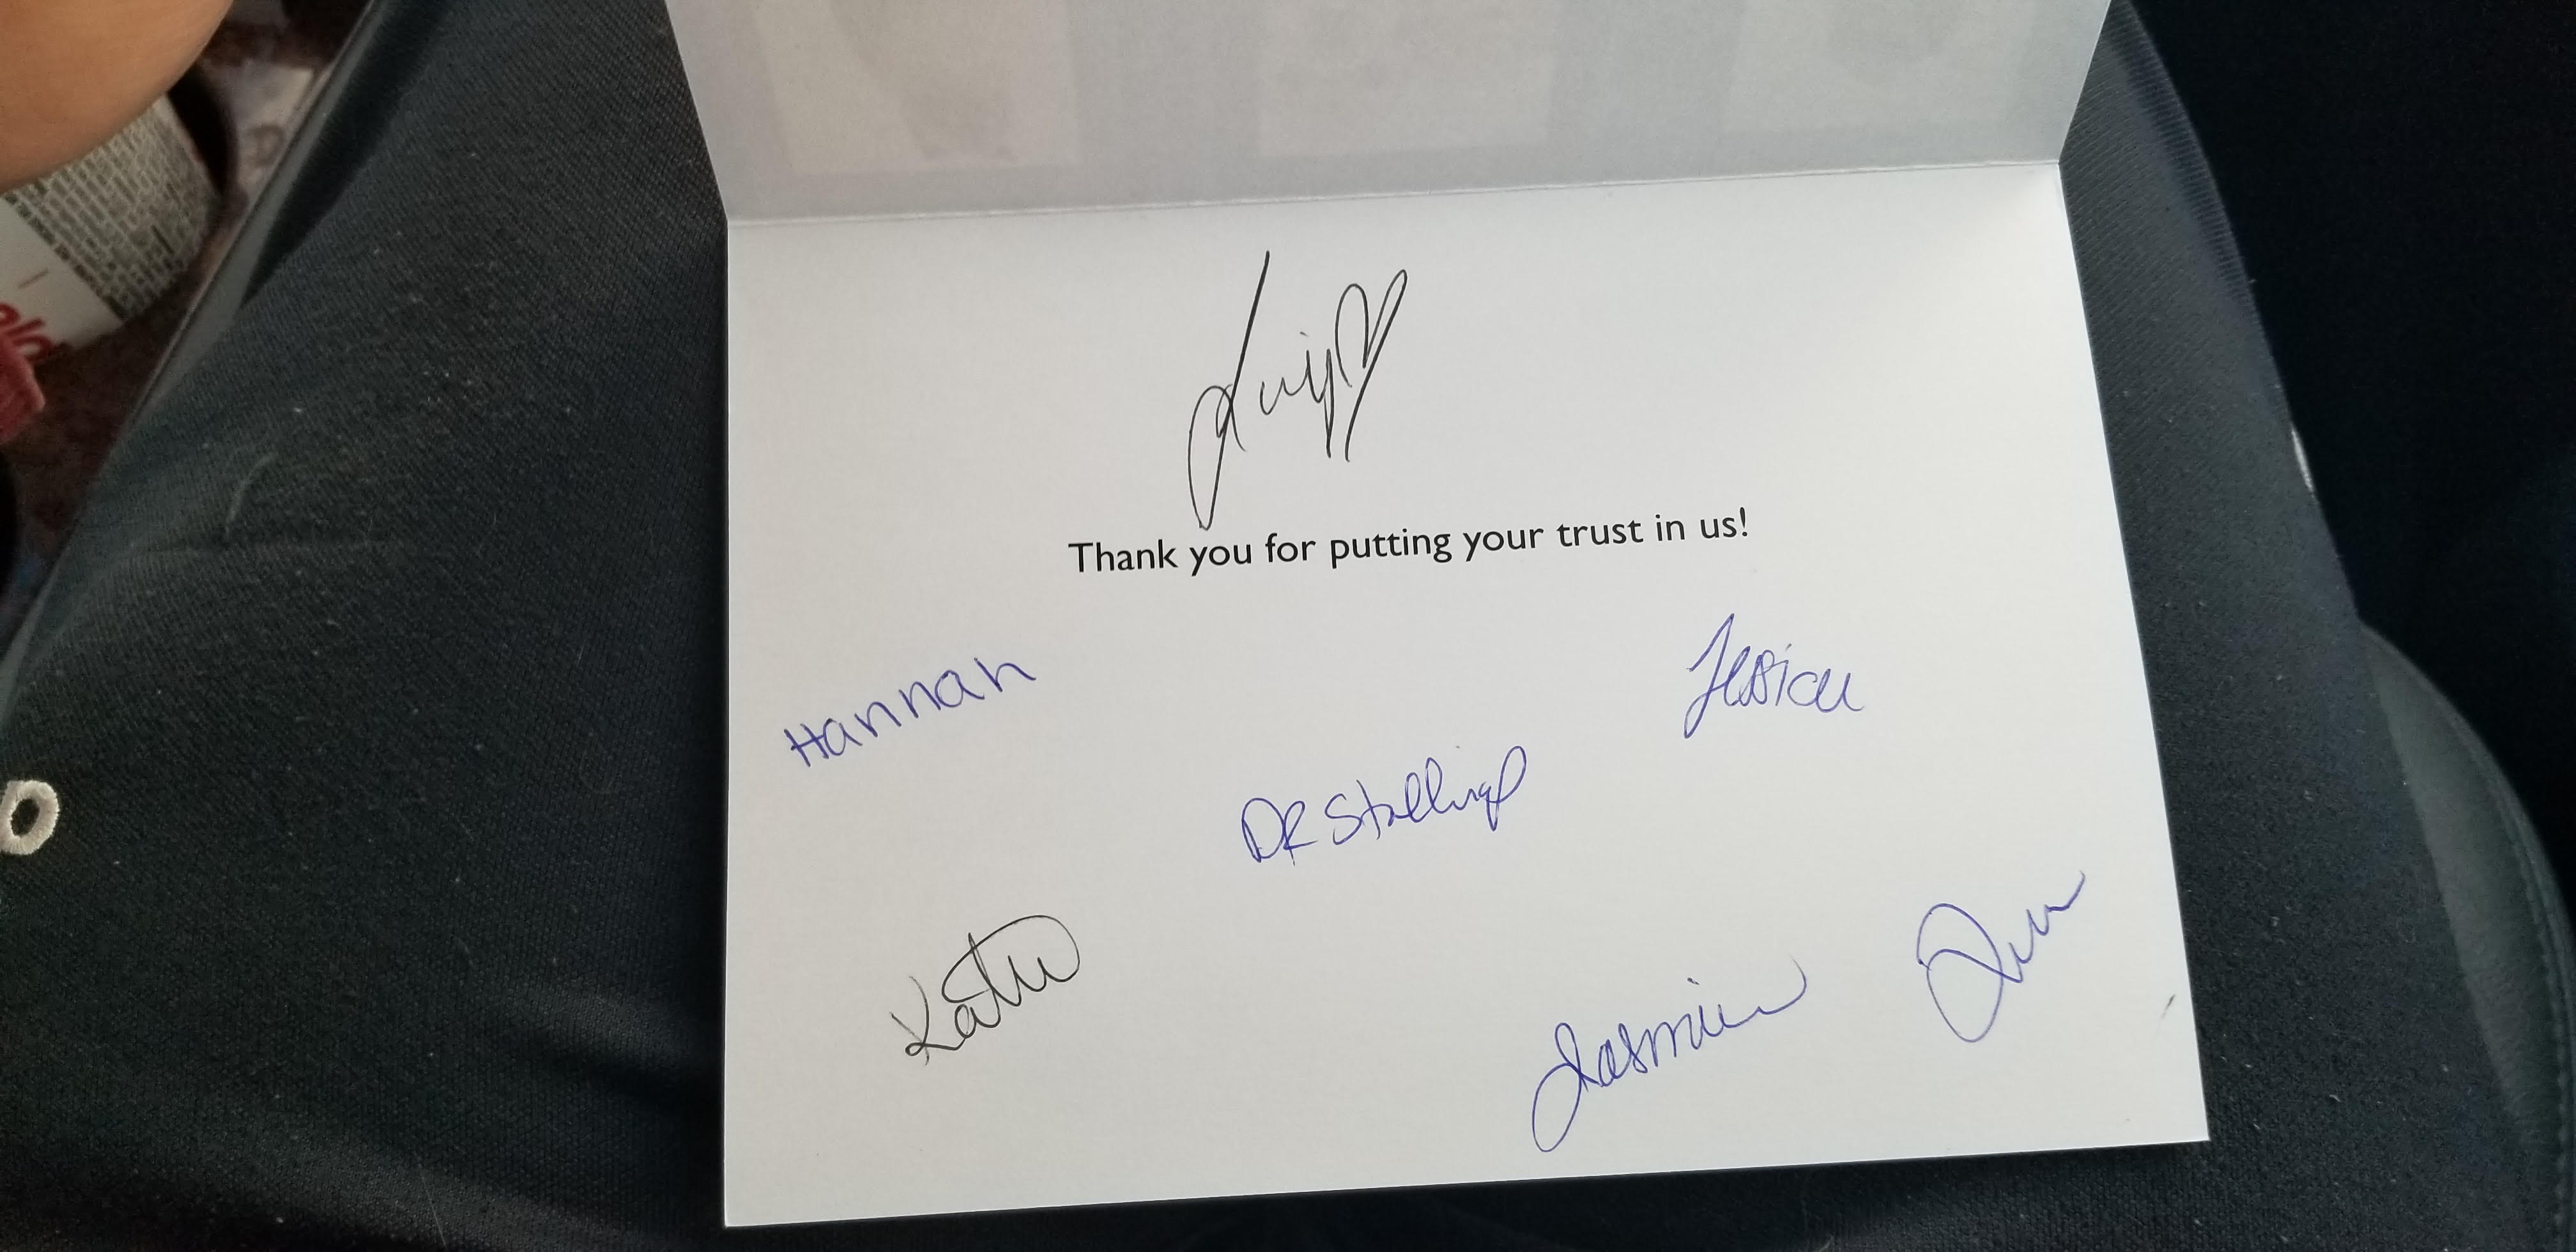 Image of the opened Thank You card